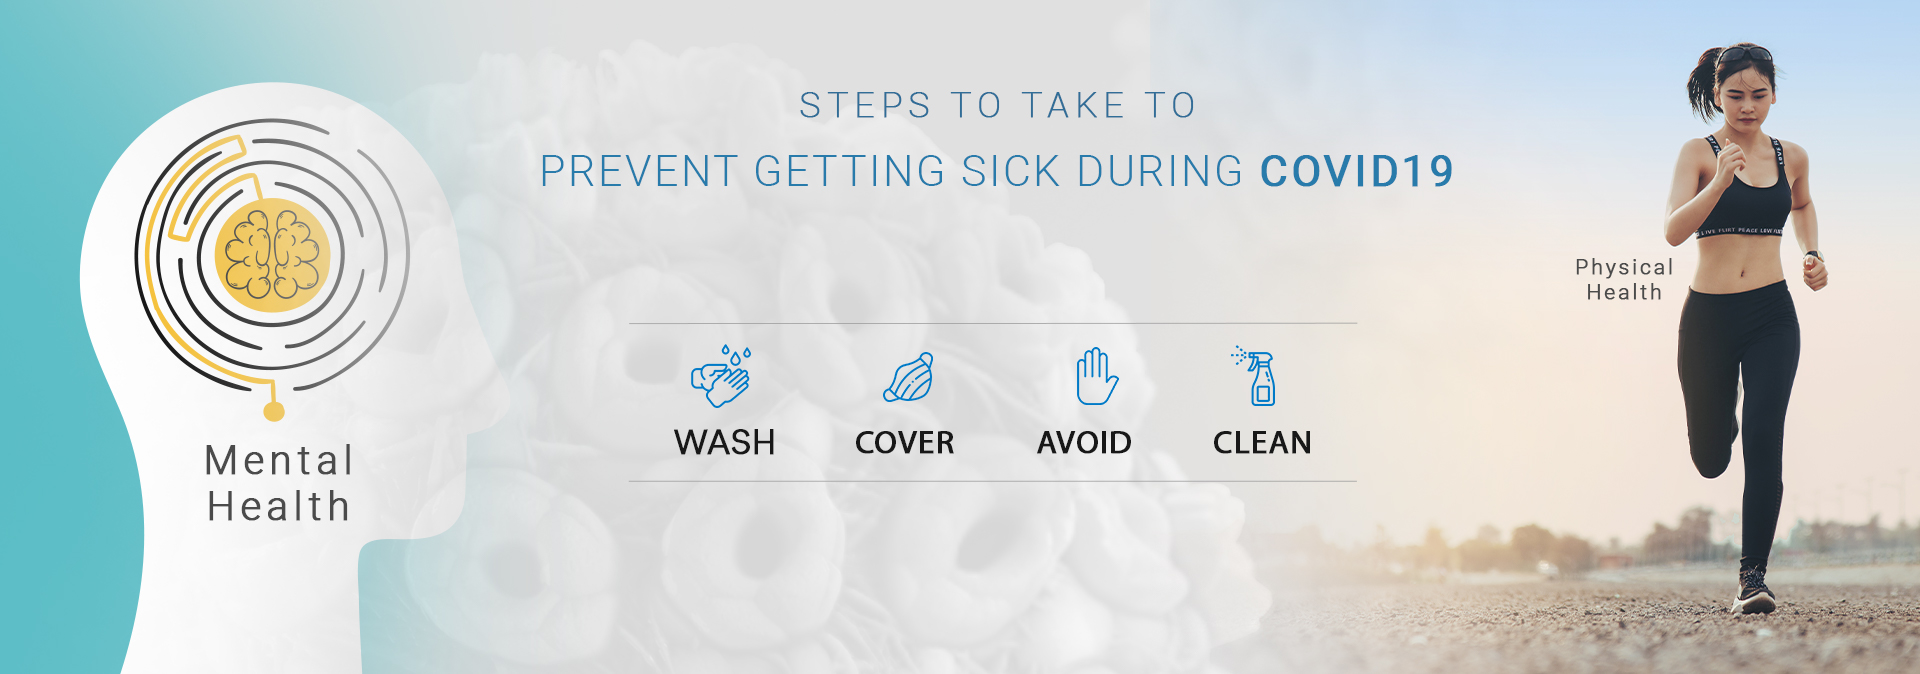 Steps to take to prevent getting sick during COVID19